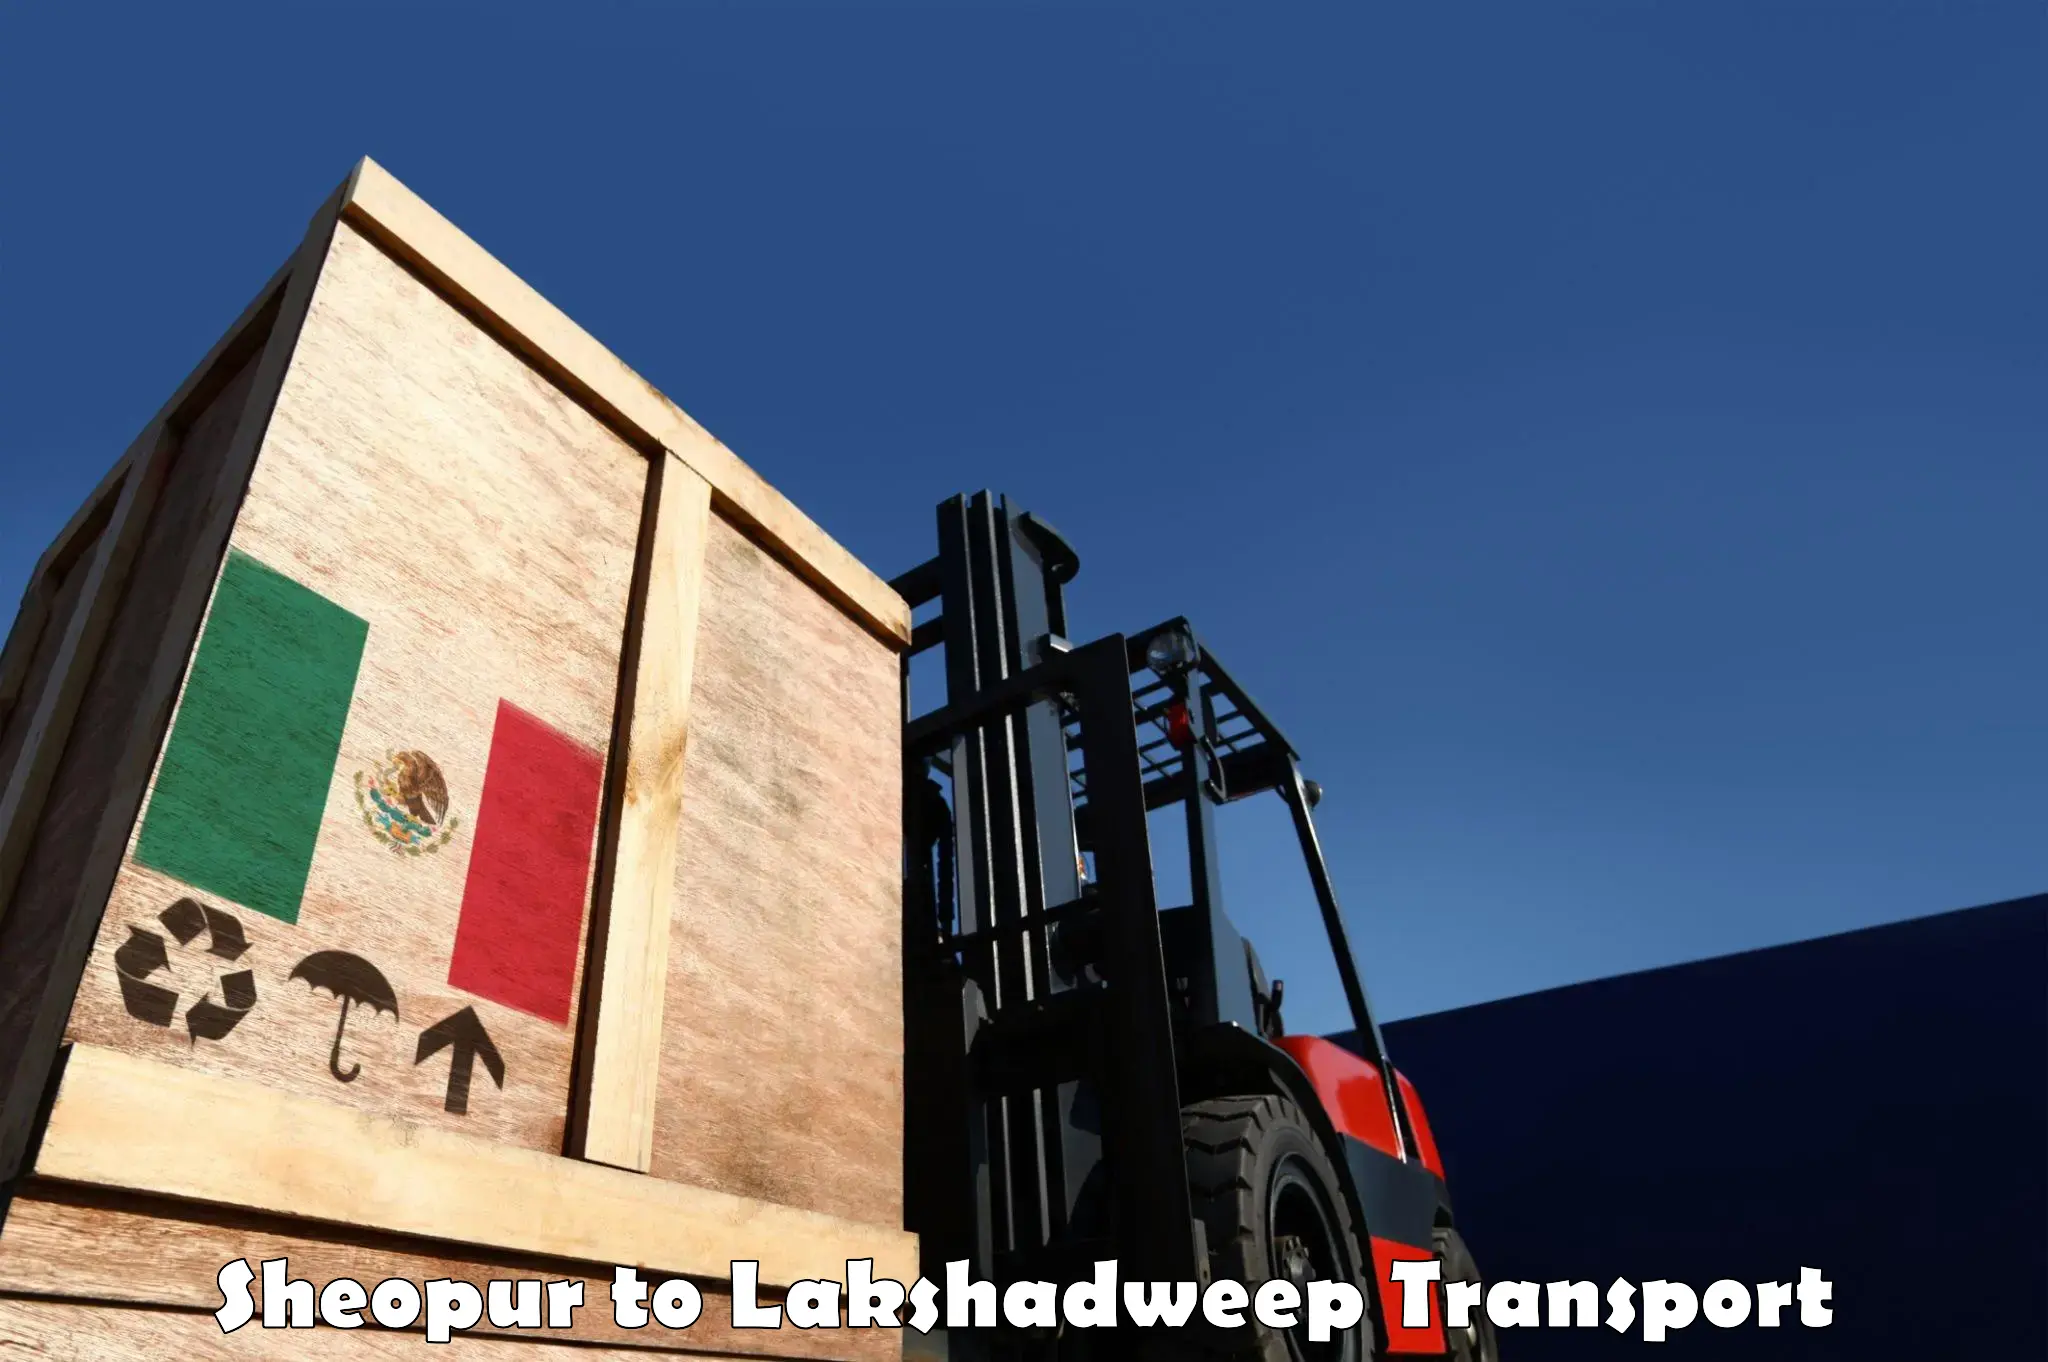 All India transport service Sheopur to Lakshadweep